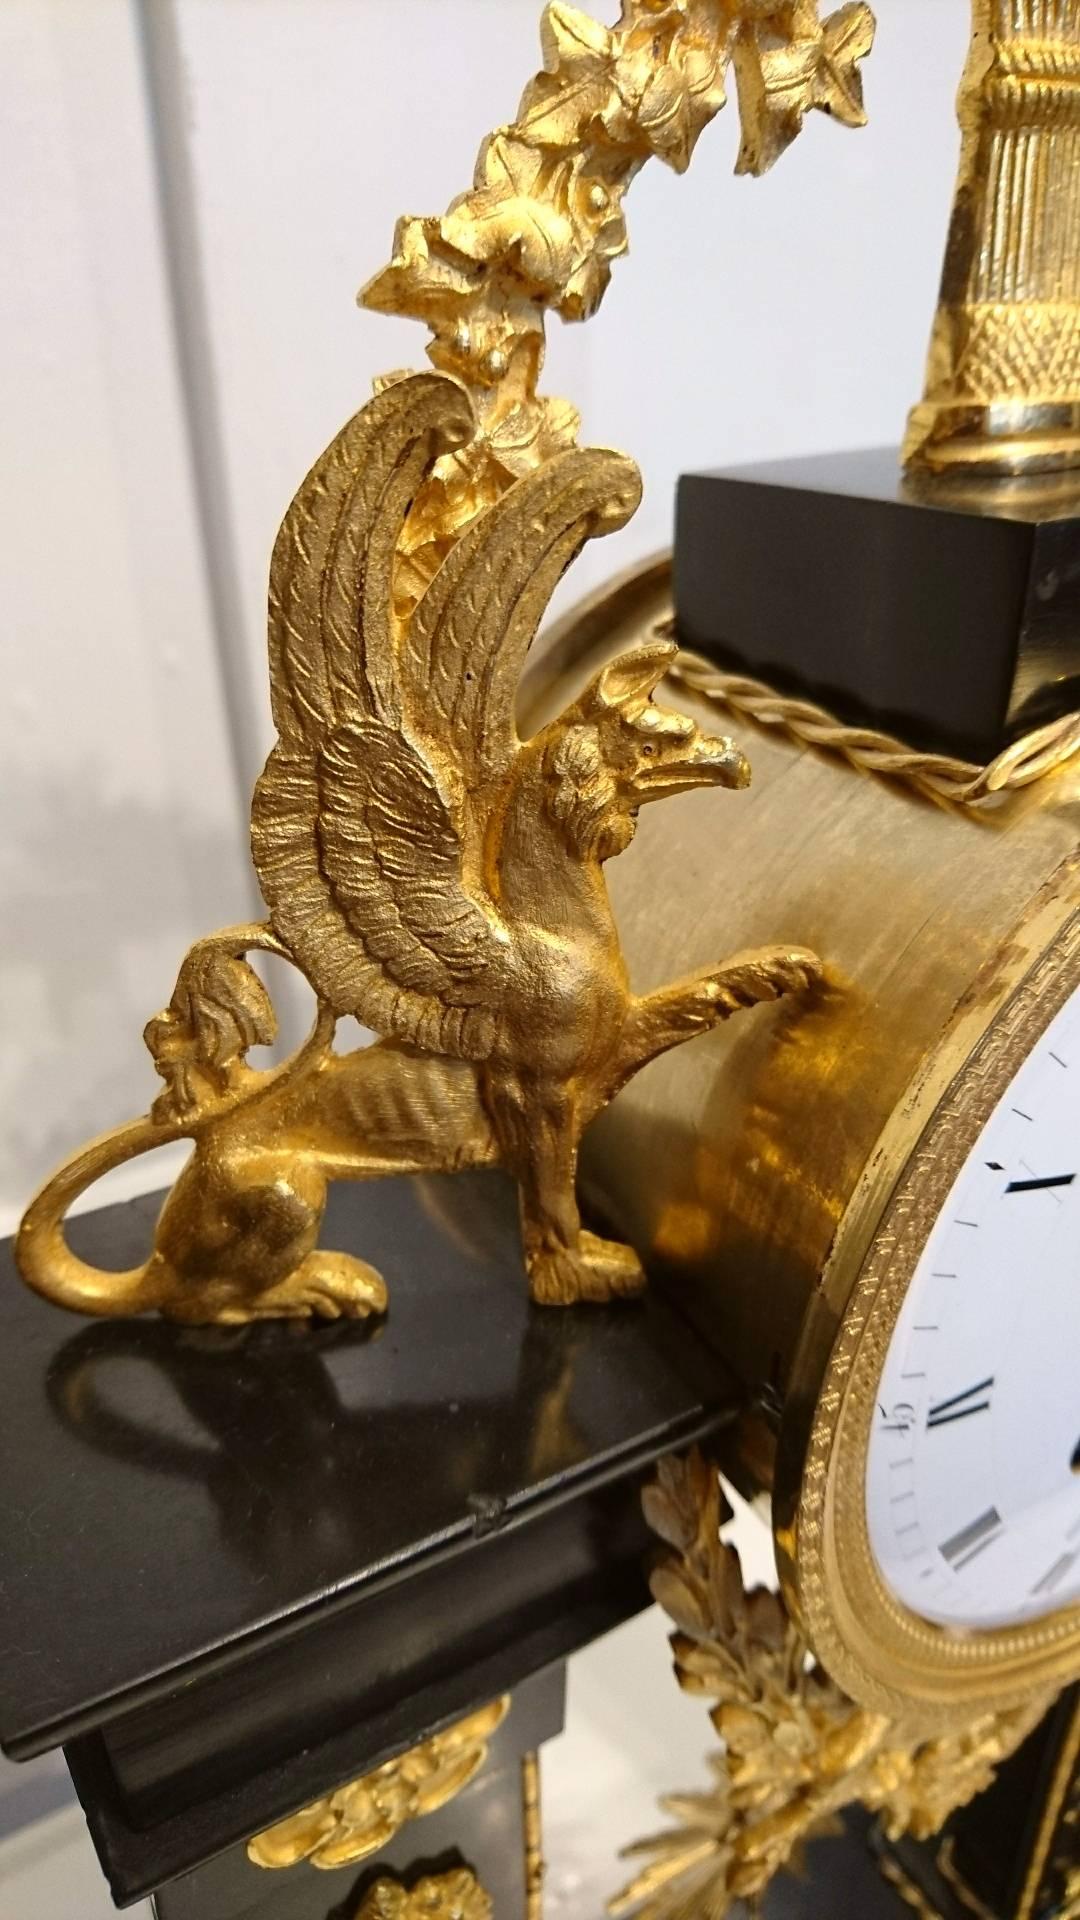 19th Century French First Empire Marble and Ormolu Portico Clock, circa 1800 For Sale